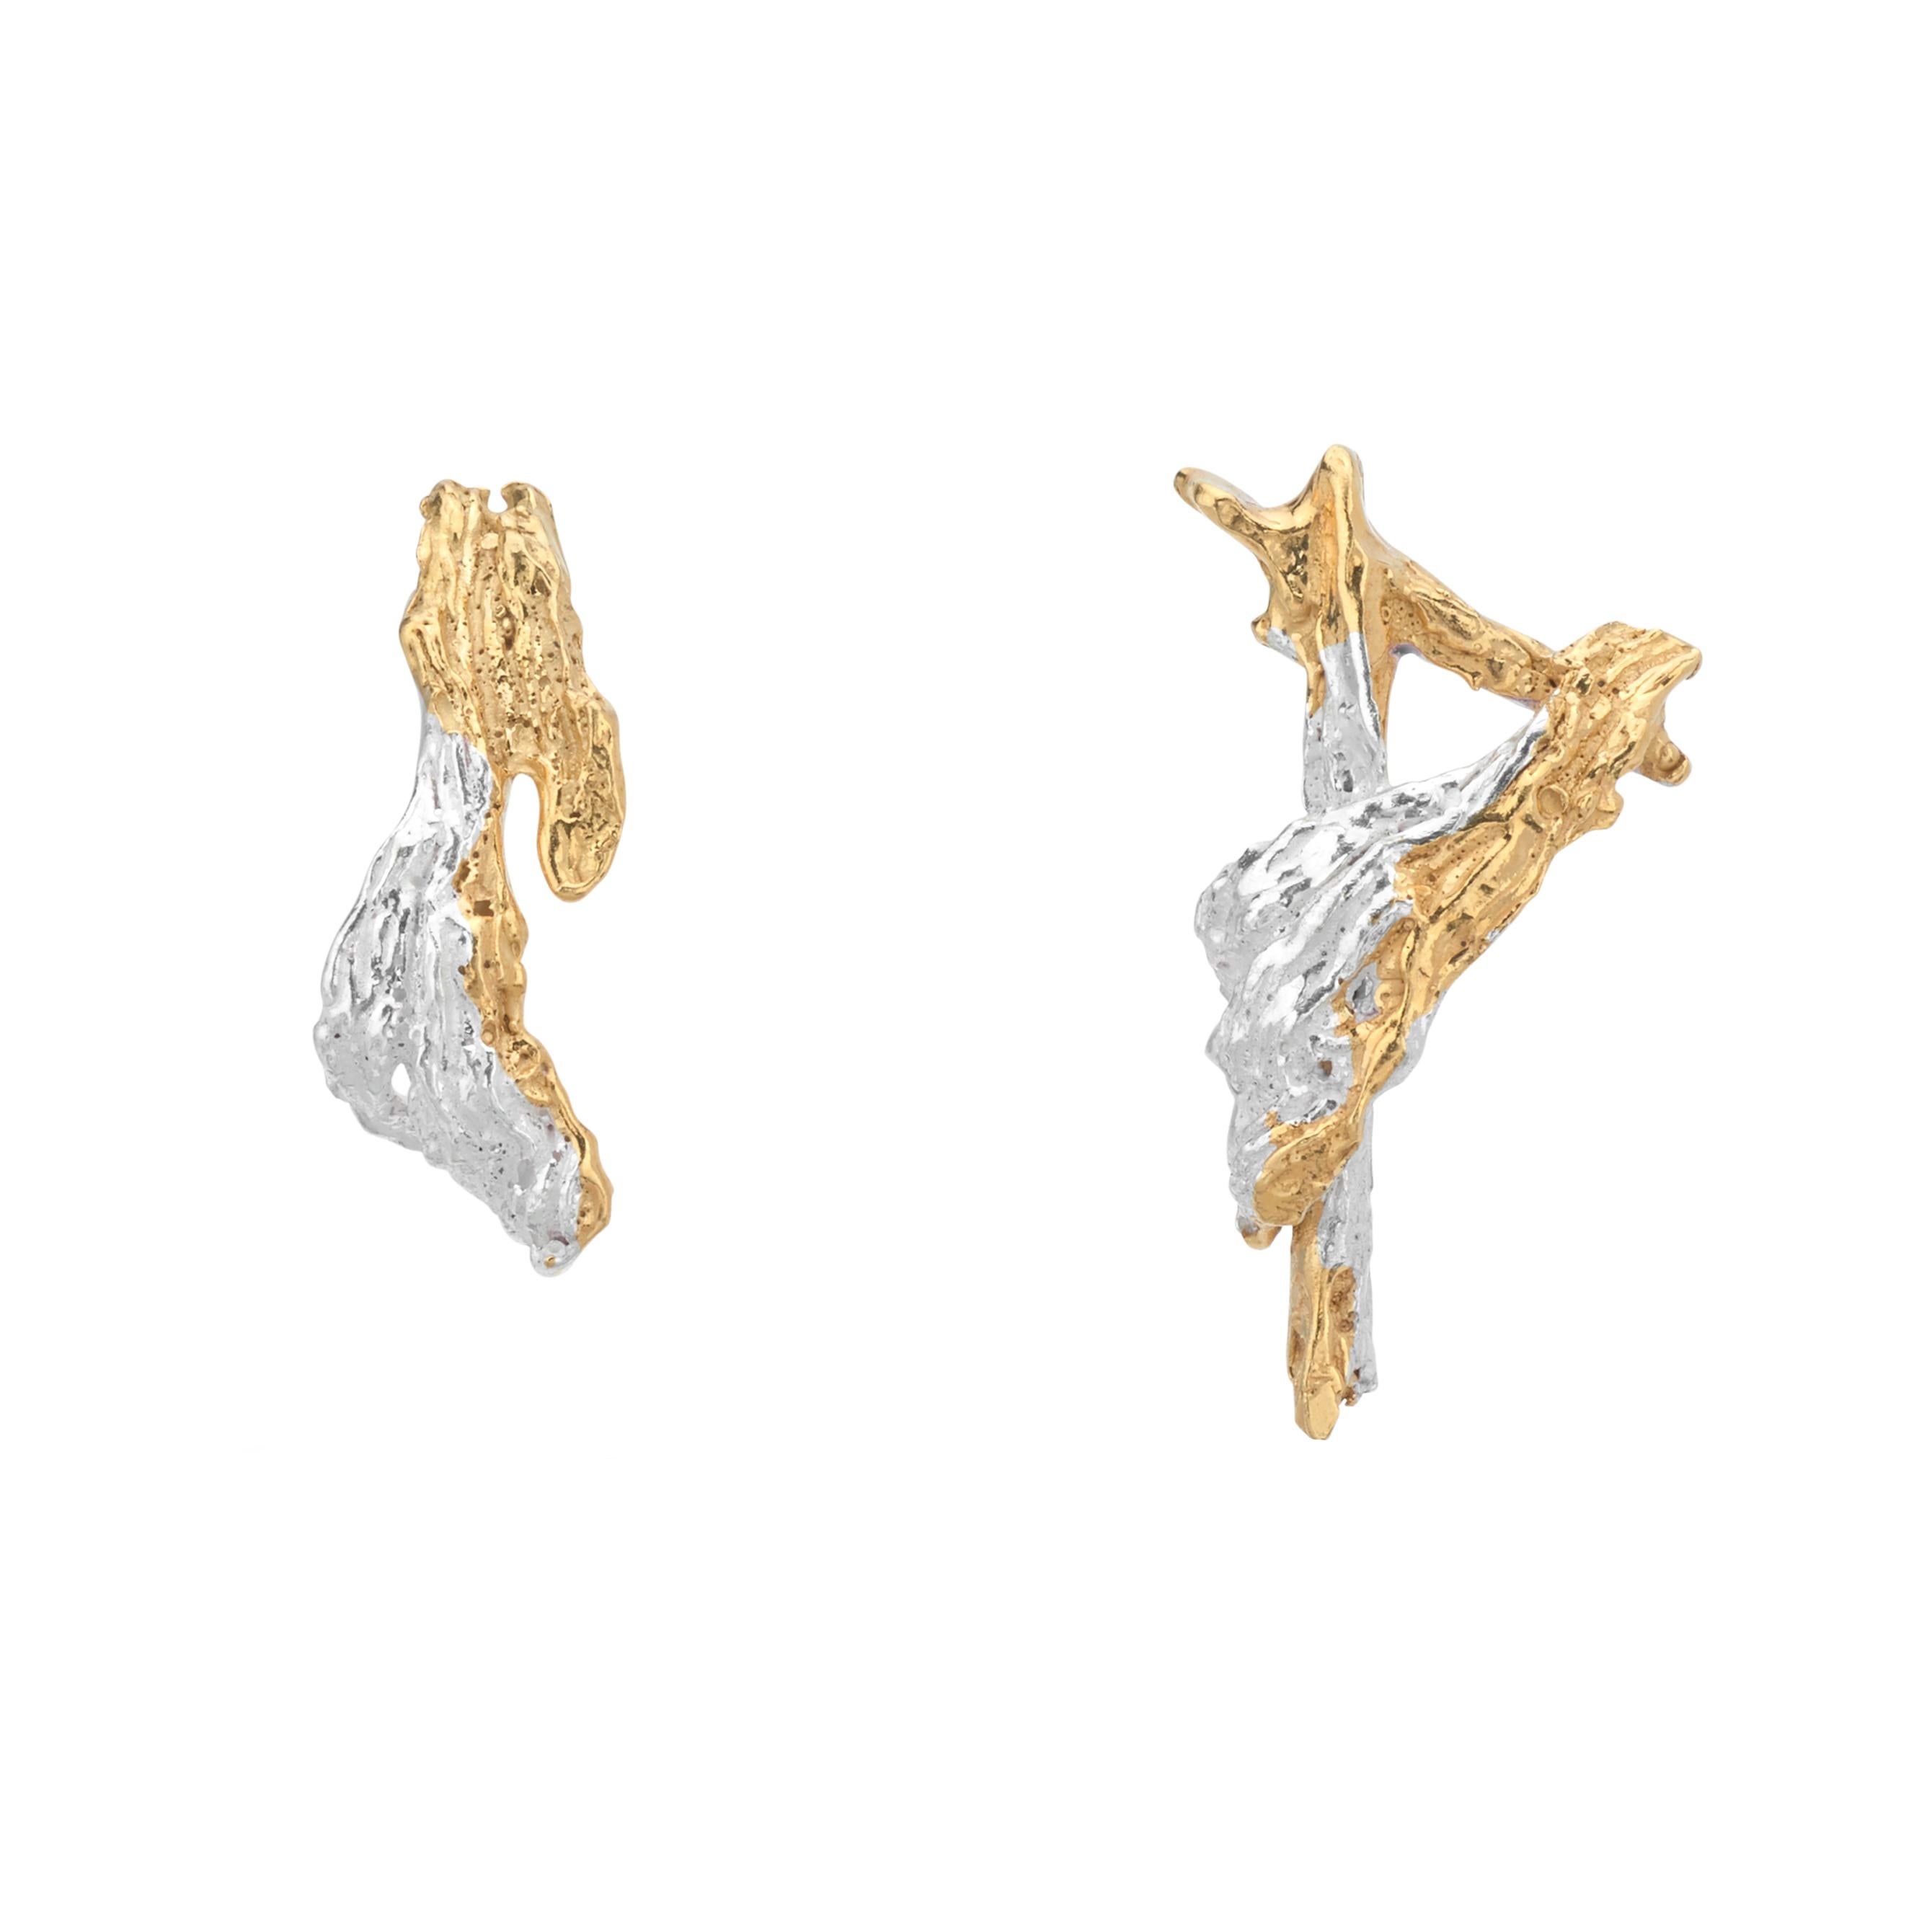 Loveness Lee - Afon - Gold and Silver Dangle Drop Textured Earrings For Sale